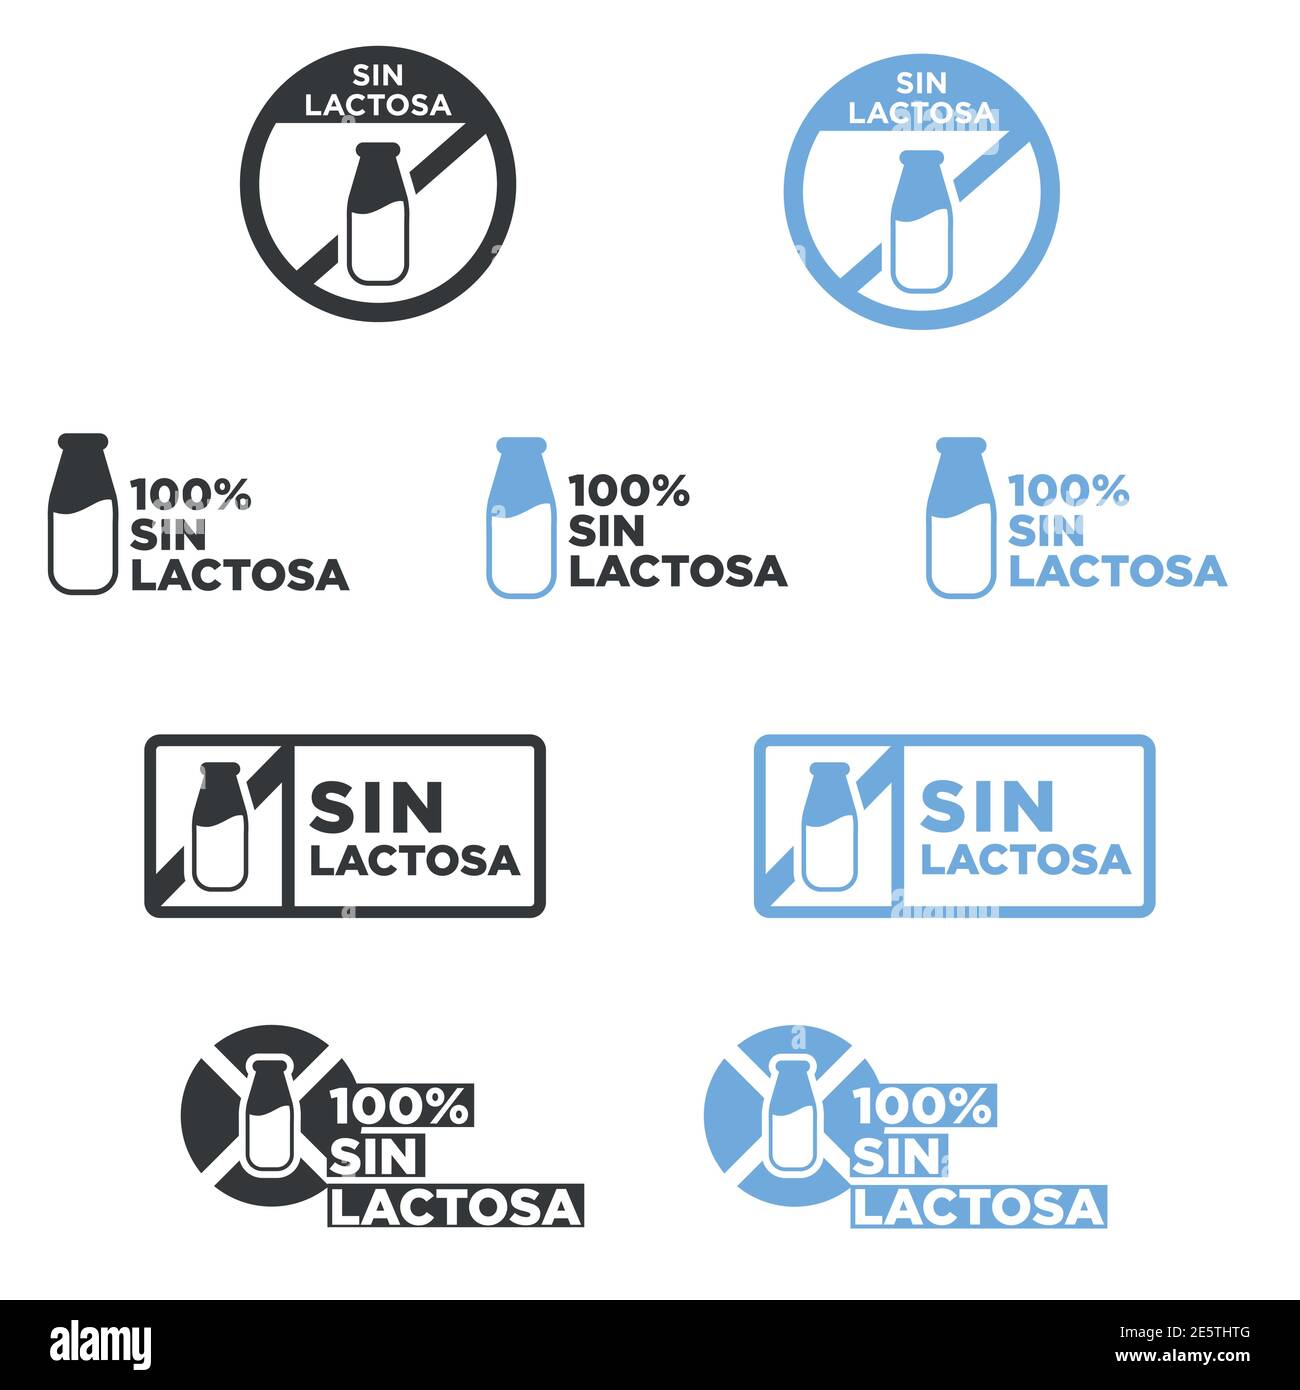 Lactose free icon set written in Spanish Stock Vector